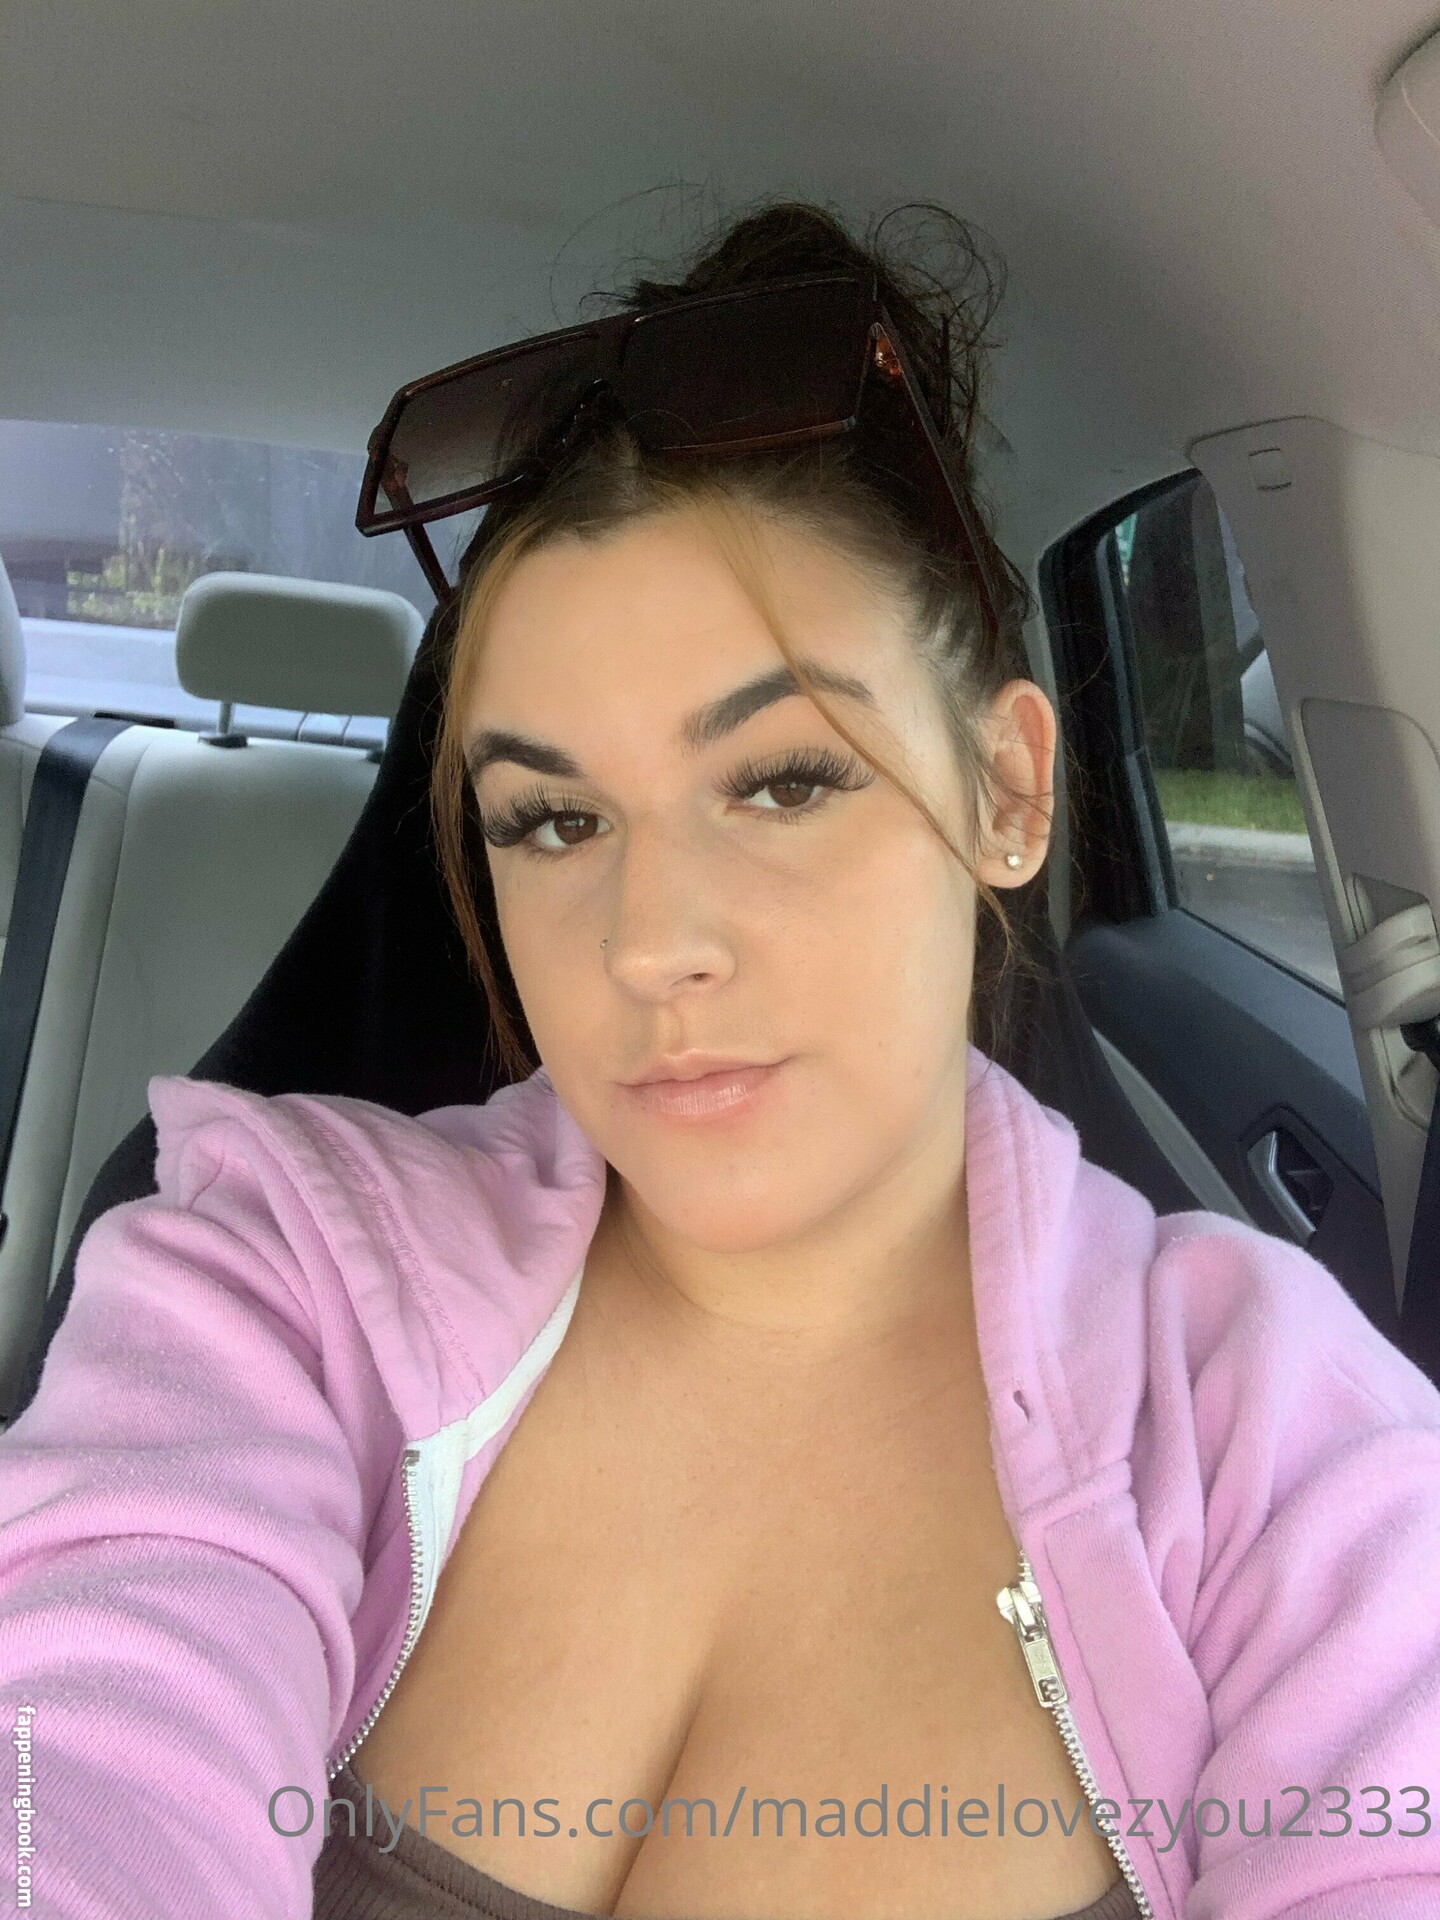 maddiexofree Nude OnlyFans Leaks